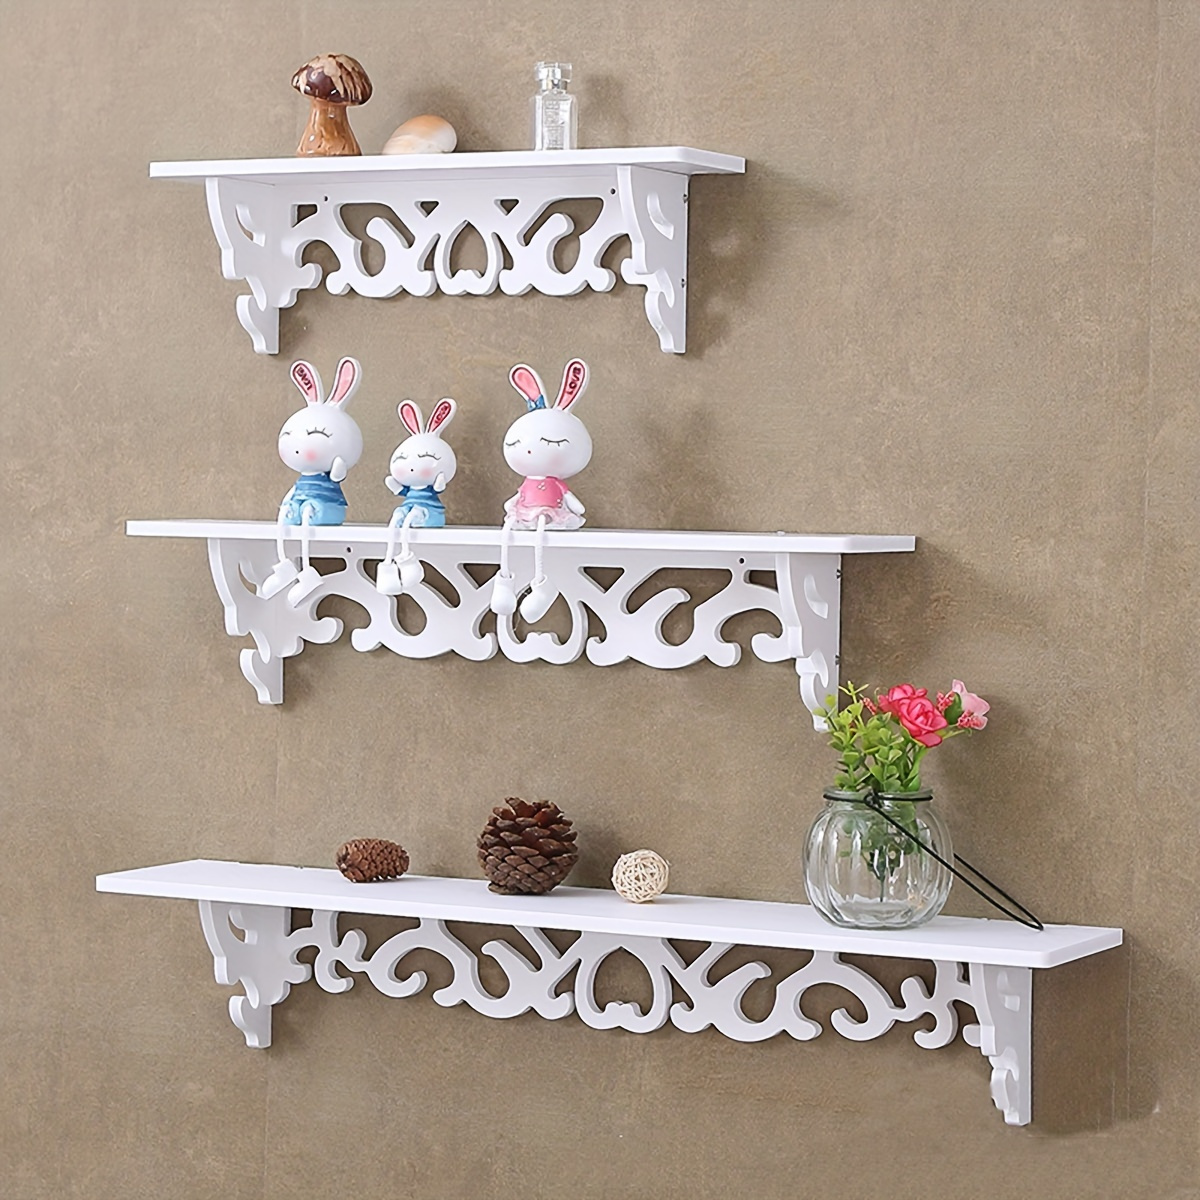 

1pc, Wall Mounted Bathroom Storage Rack, Decorative Floating Wall Shelves, Carved Cutout Design Bathroom Tray, Wall Hanging Bookshelf, Display Rack For Home, Bathroom Accessories